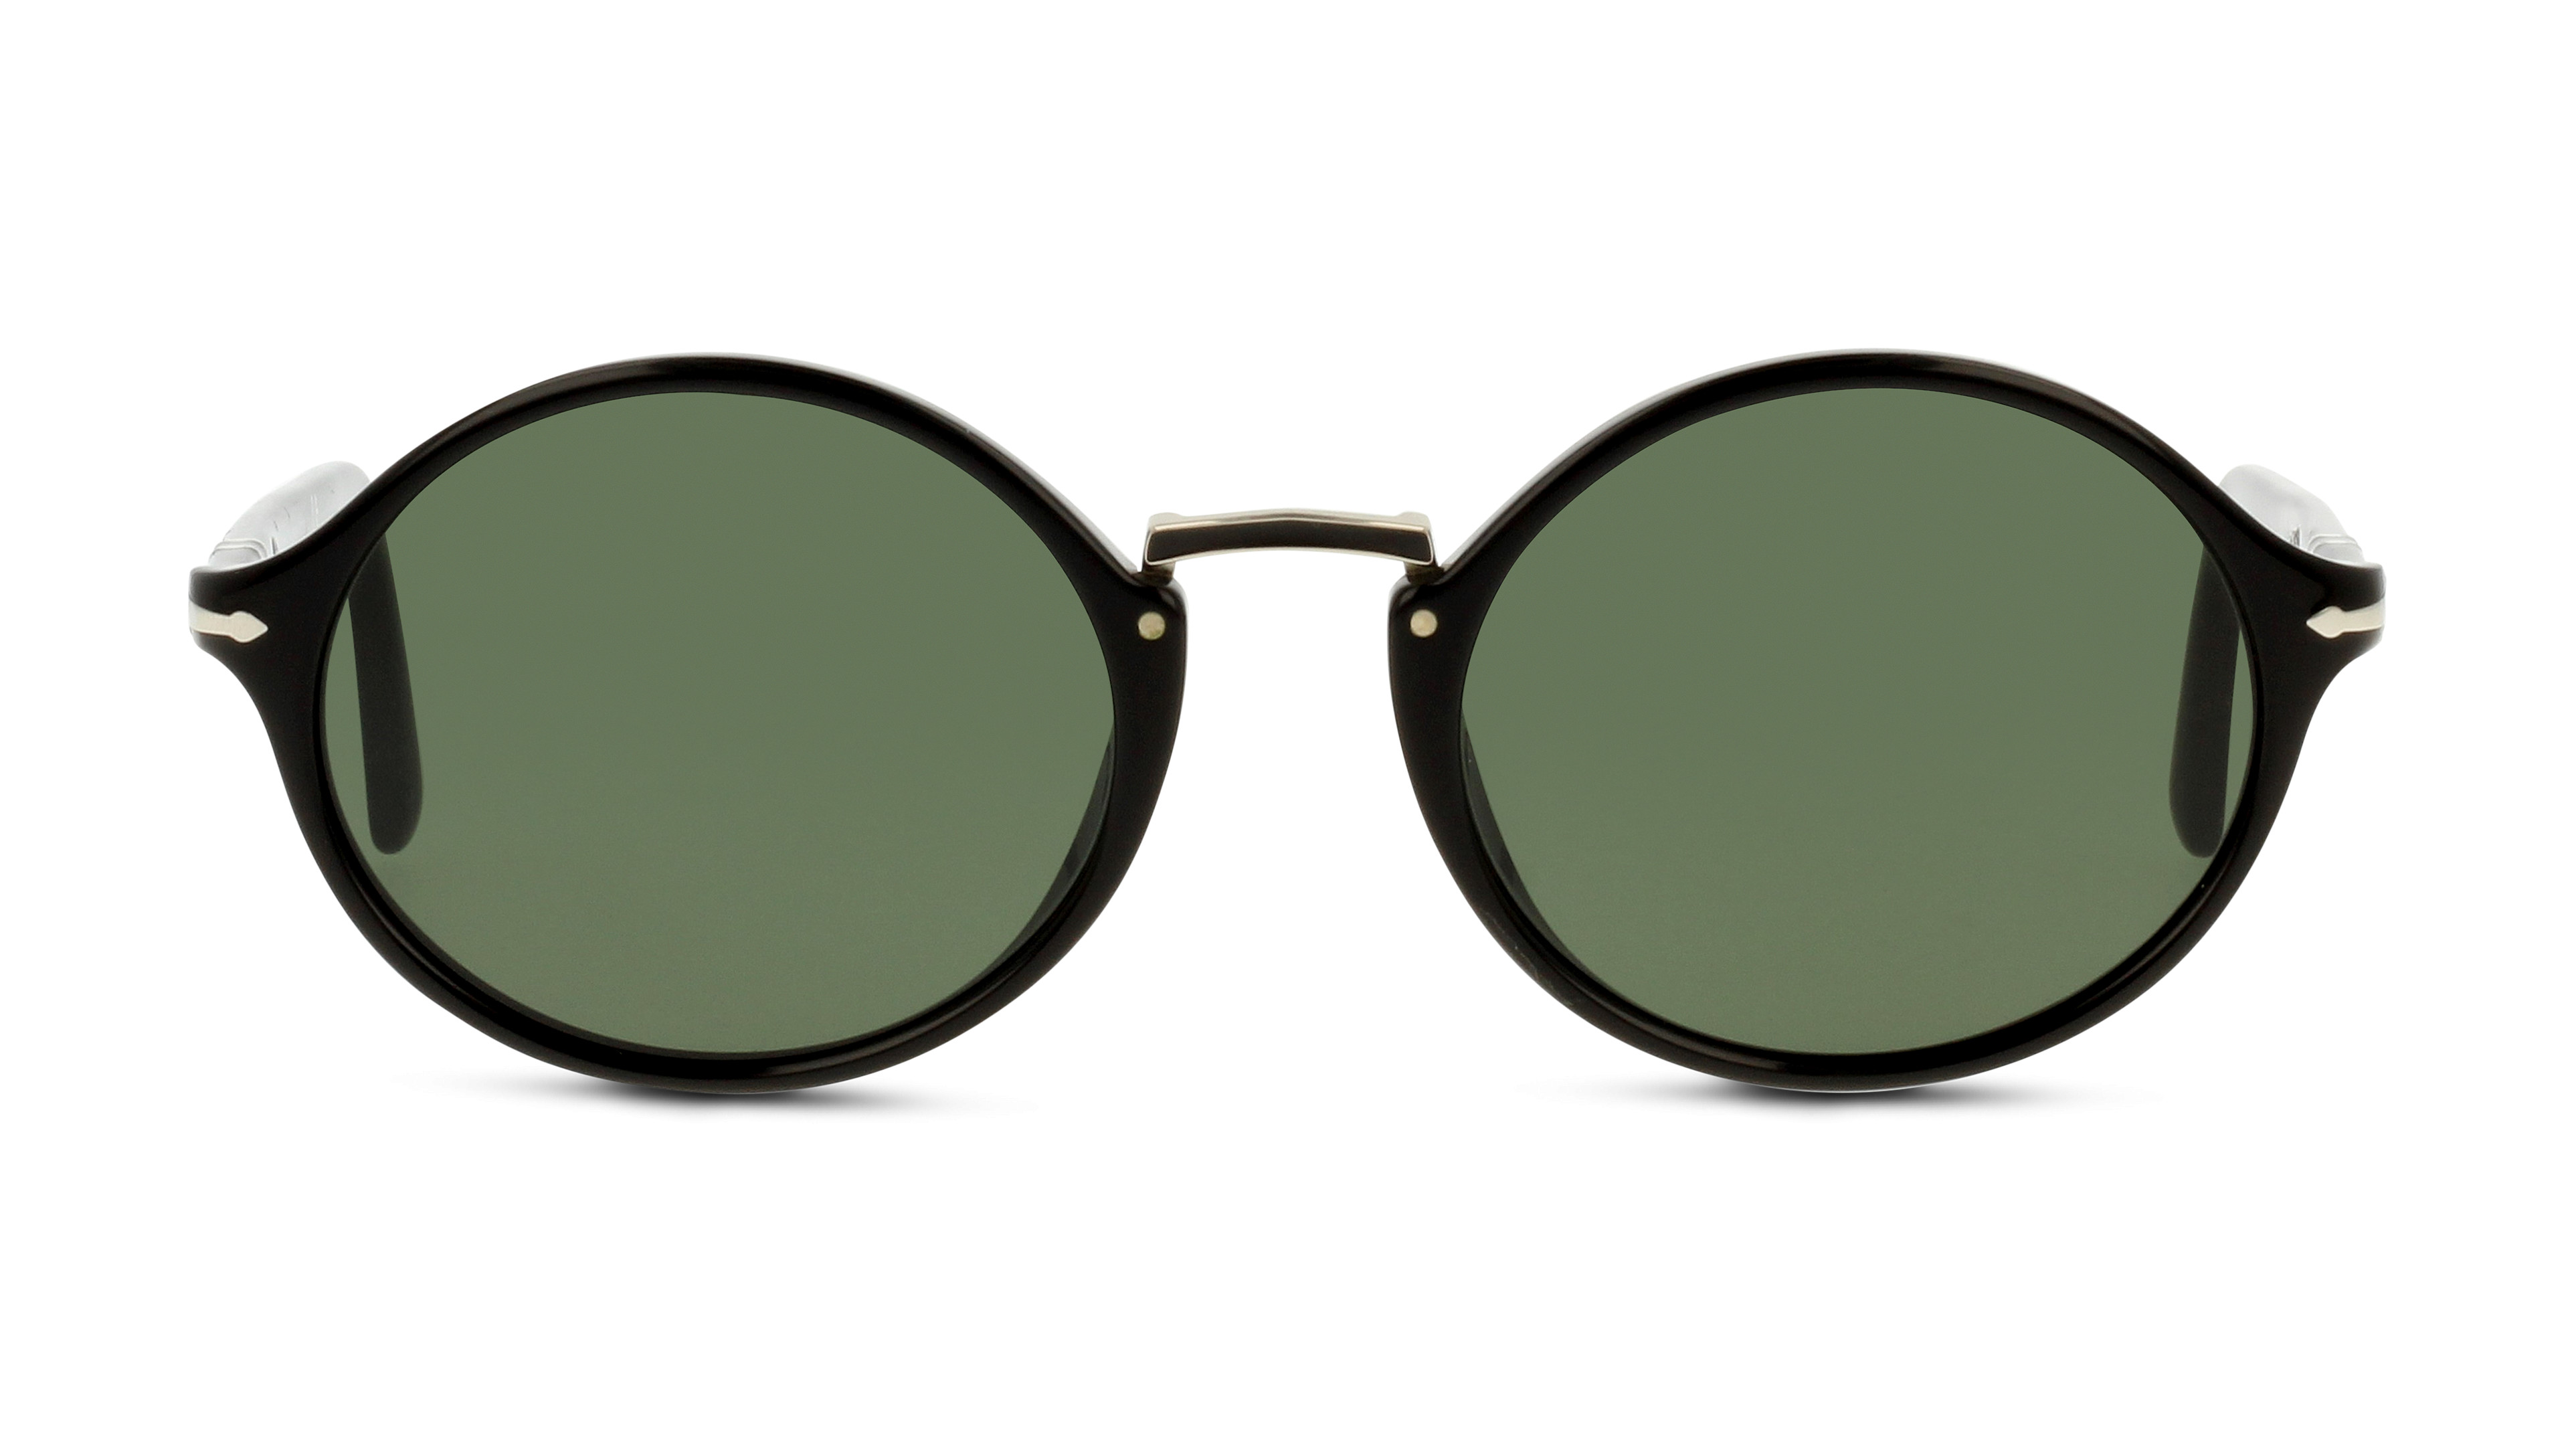 [products.image.front] Persol PO3208S 95/31 Sonnenbrille